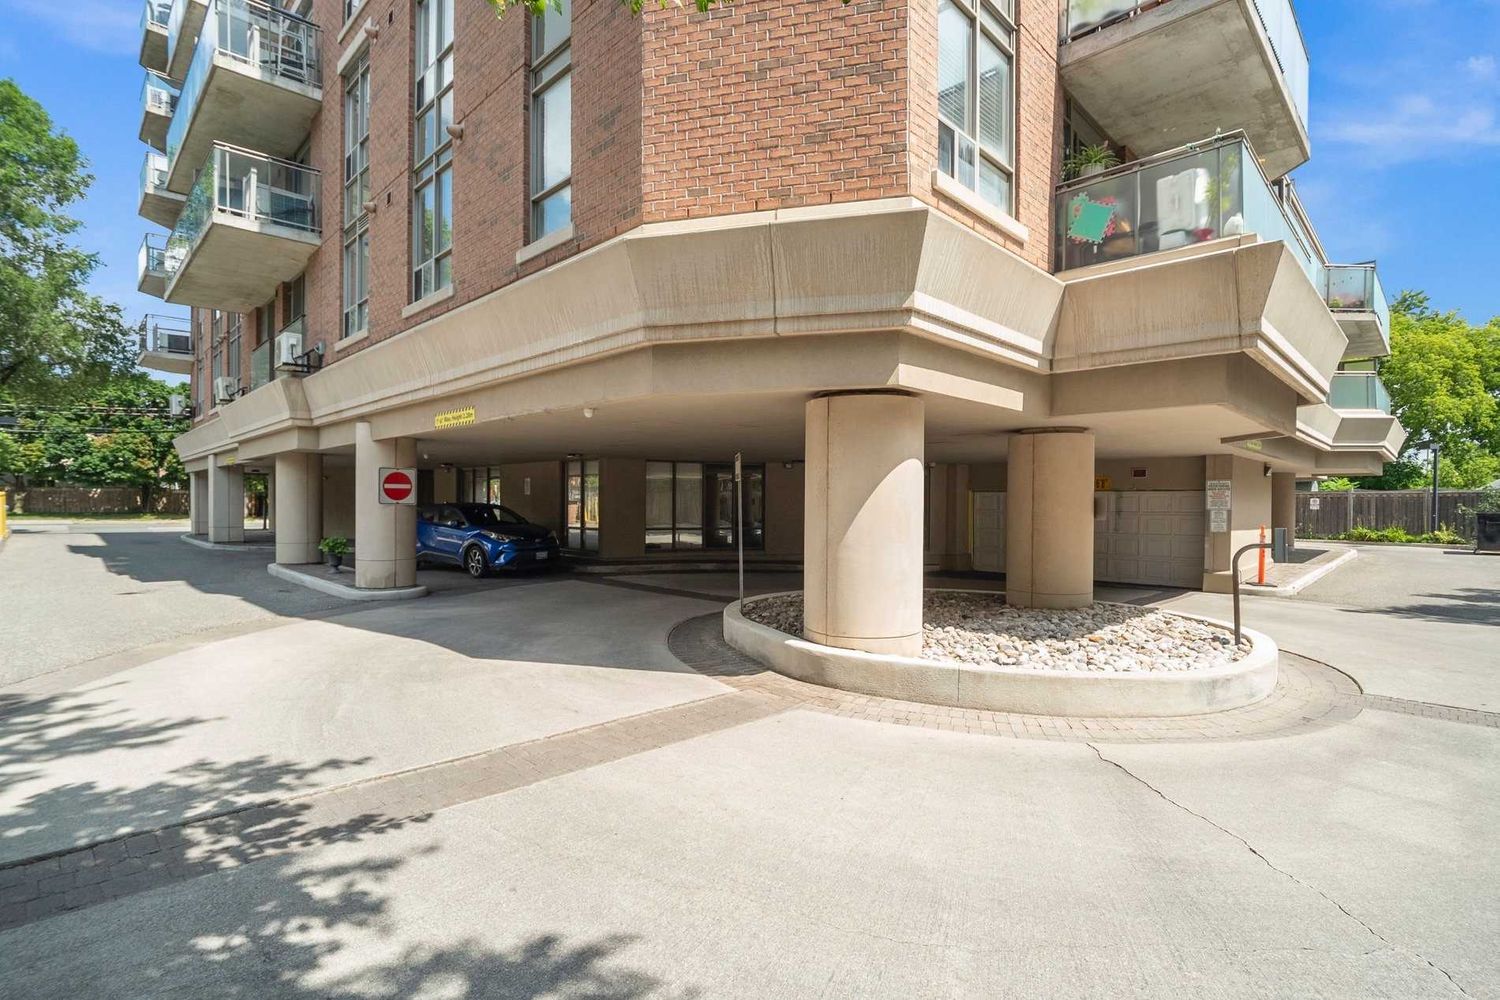 801 Sheppard Avenue. Acclaim Condos is located in  North York, Toronto - image #2 of 2